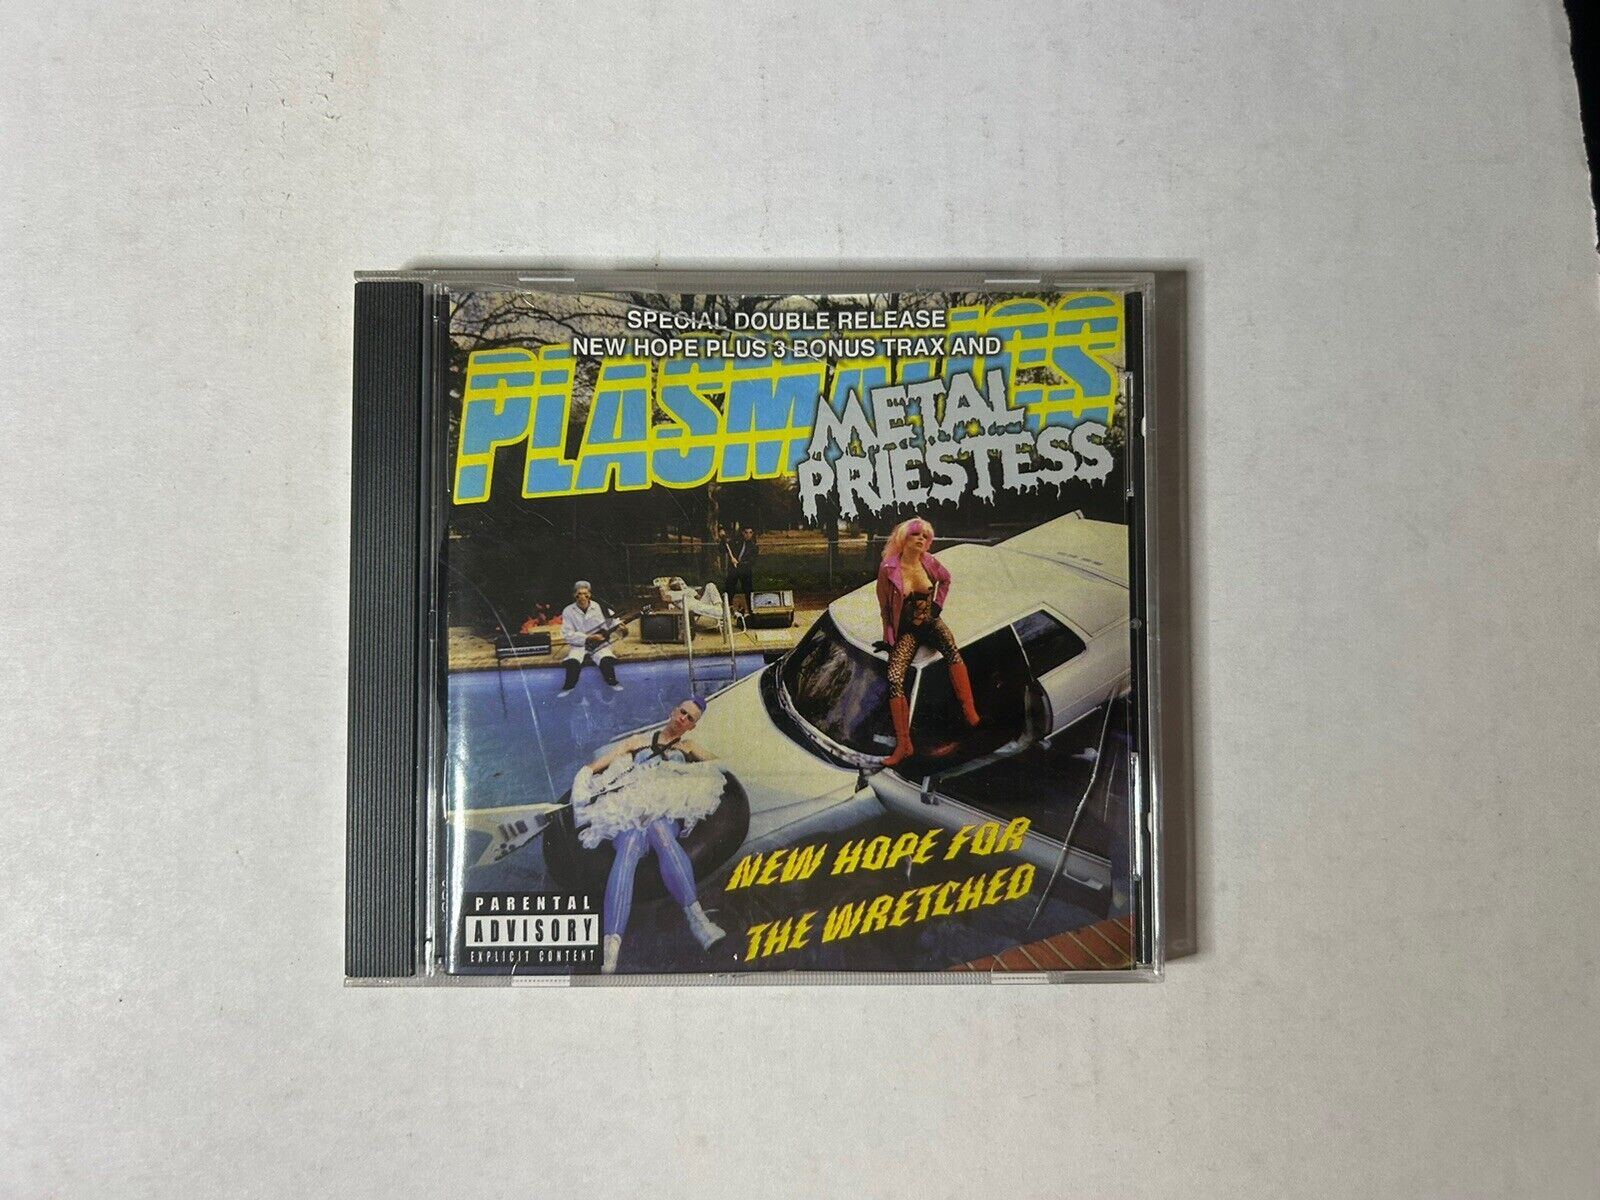 Plasmatics New Hope For The Wretched / Metal Priestess CD WOW106 Tested EX VG+